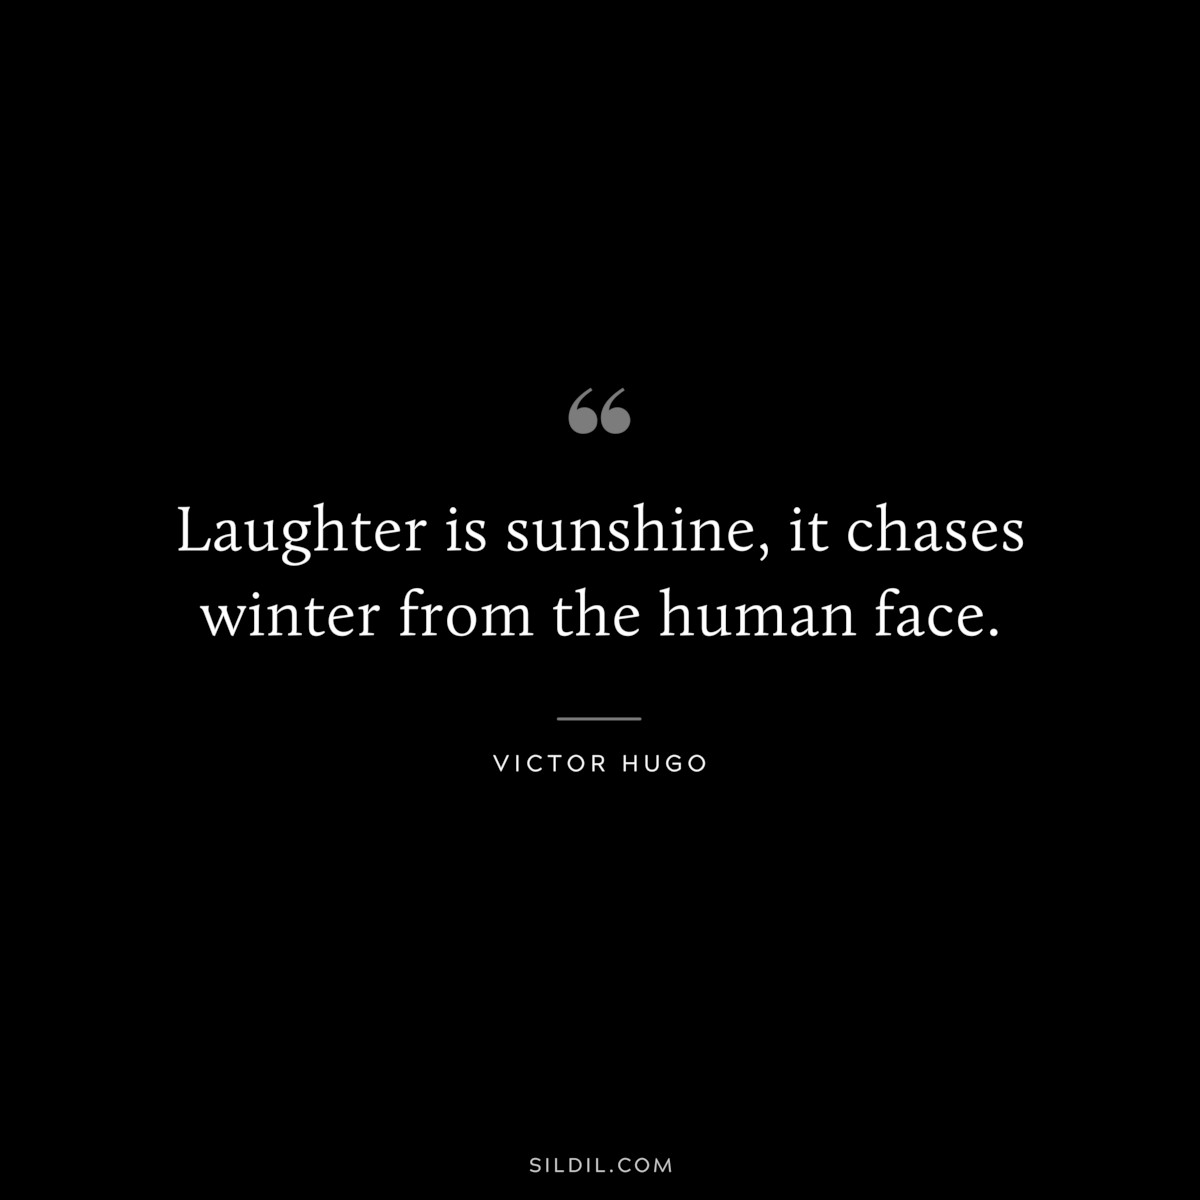 Laughter is sunshine, it chases winter from the human face.― Victor Hugo